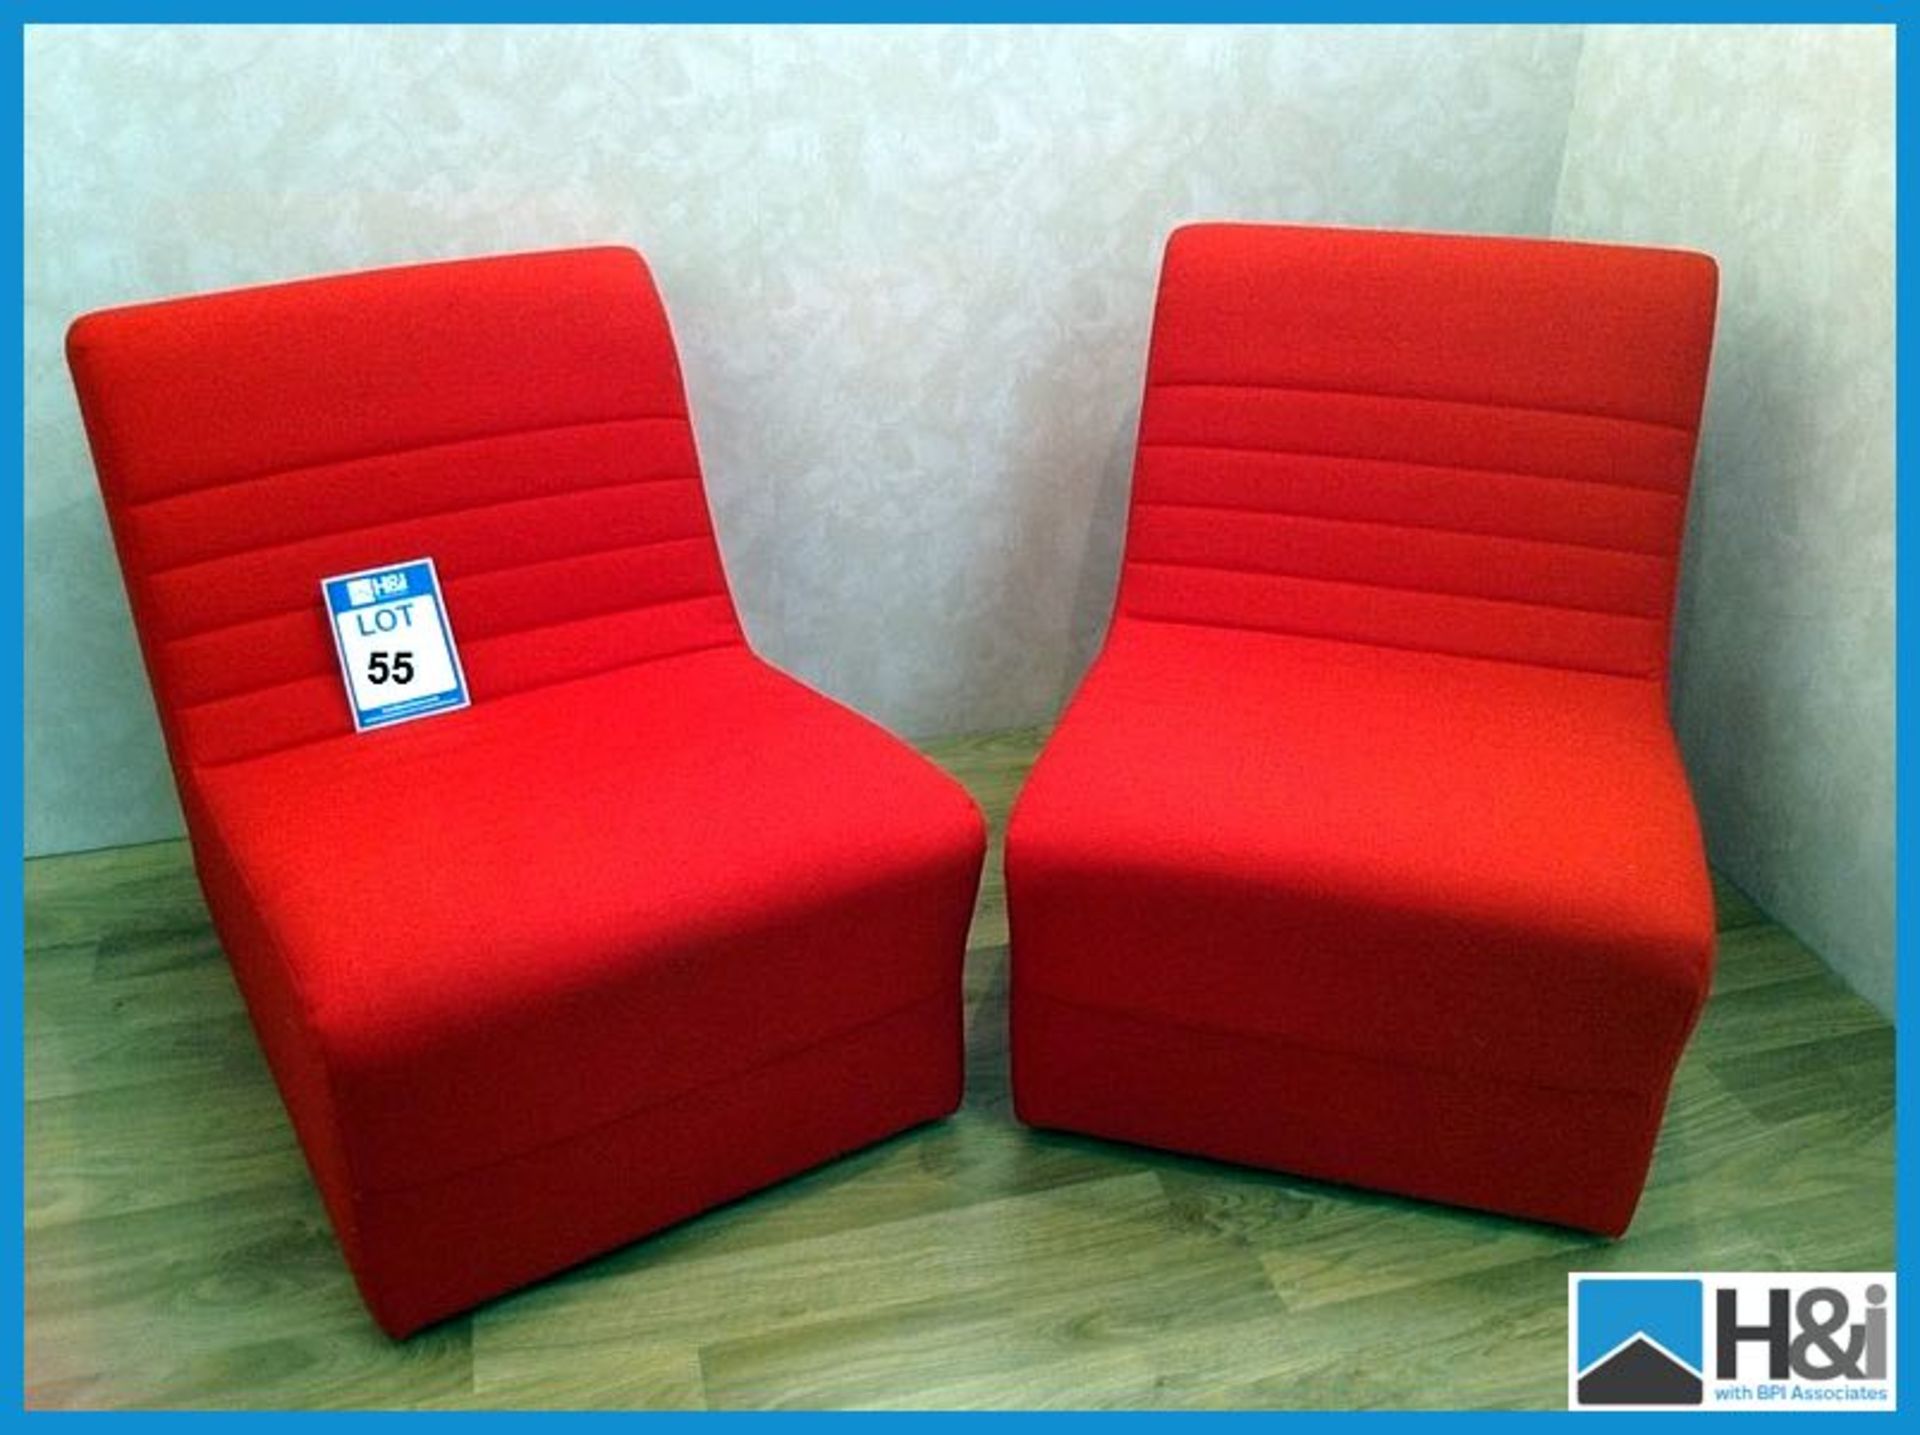 2 x New Malaga Red single seater chair  - L15 Appraisal: New Serial No: NA Location: Identihire,